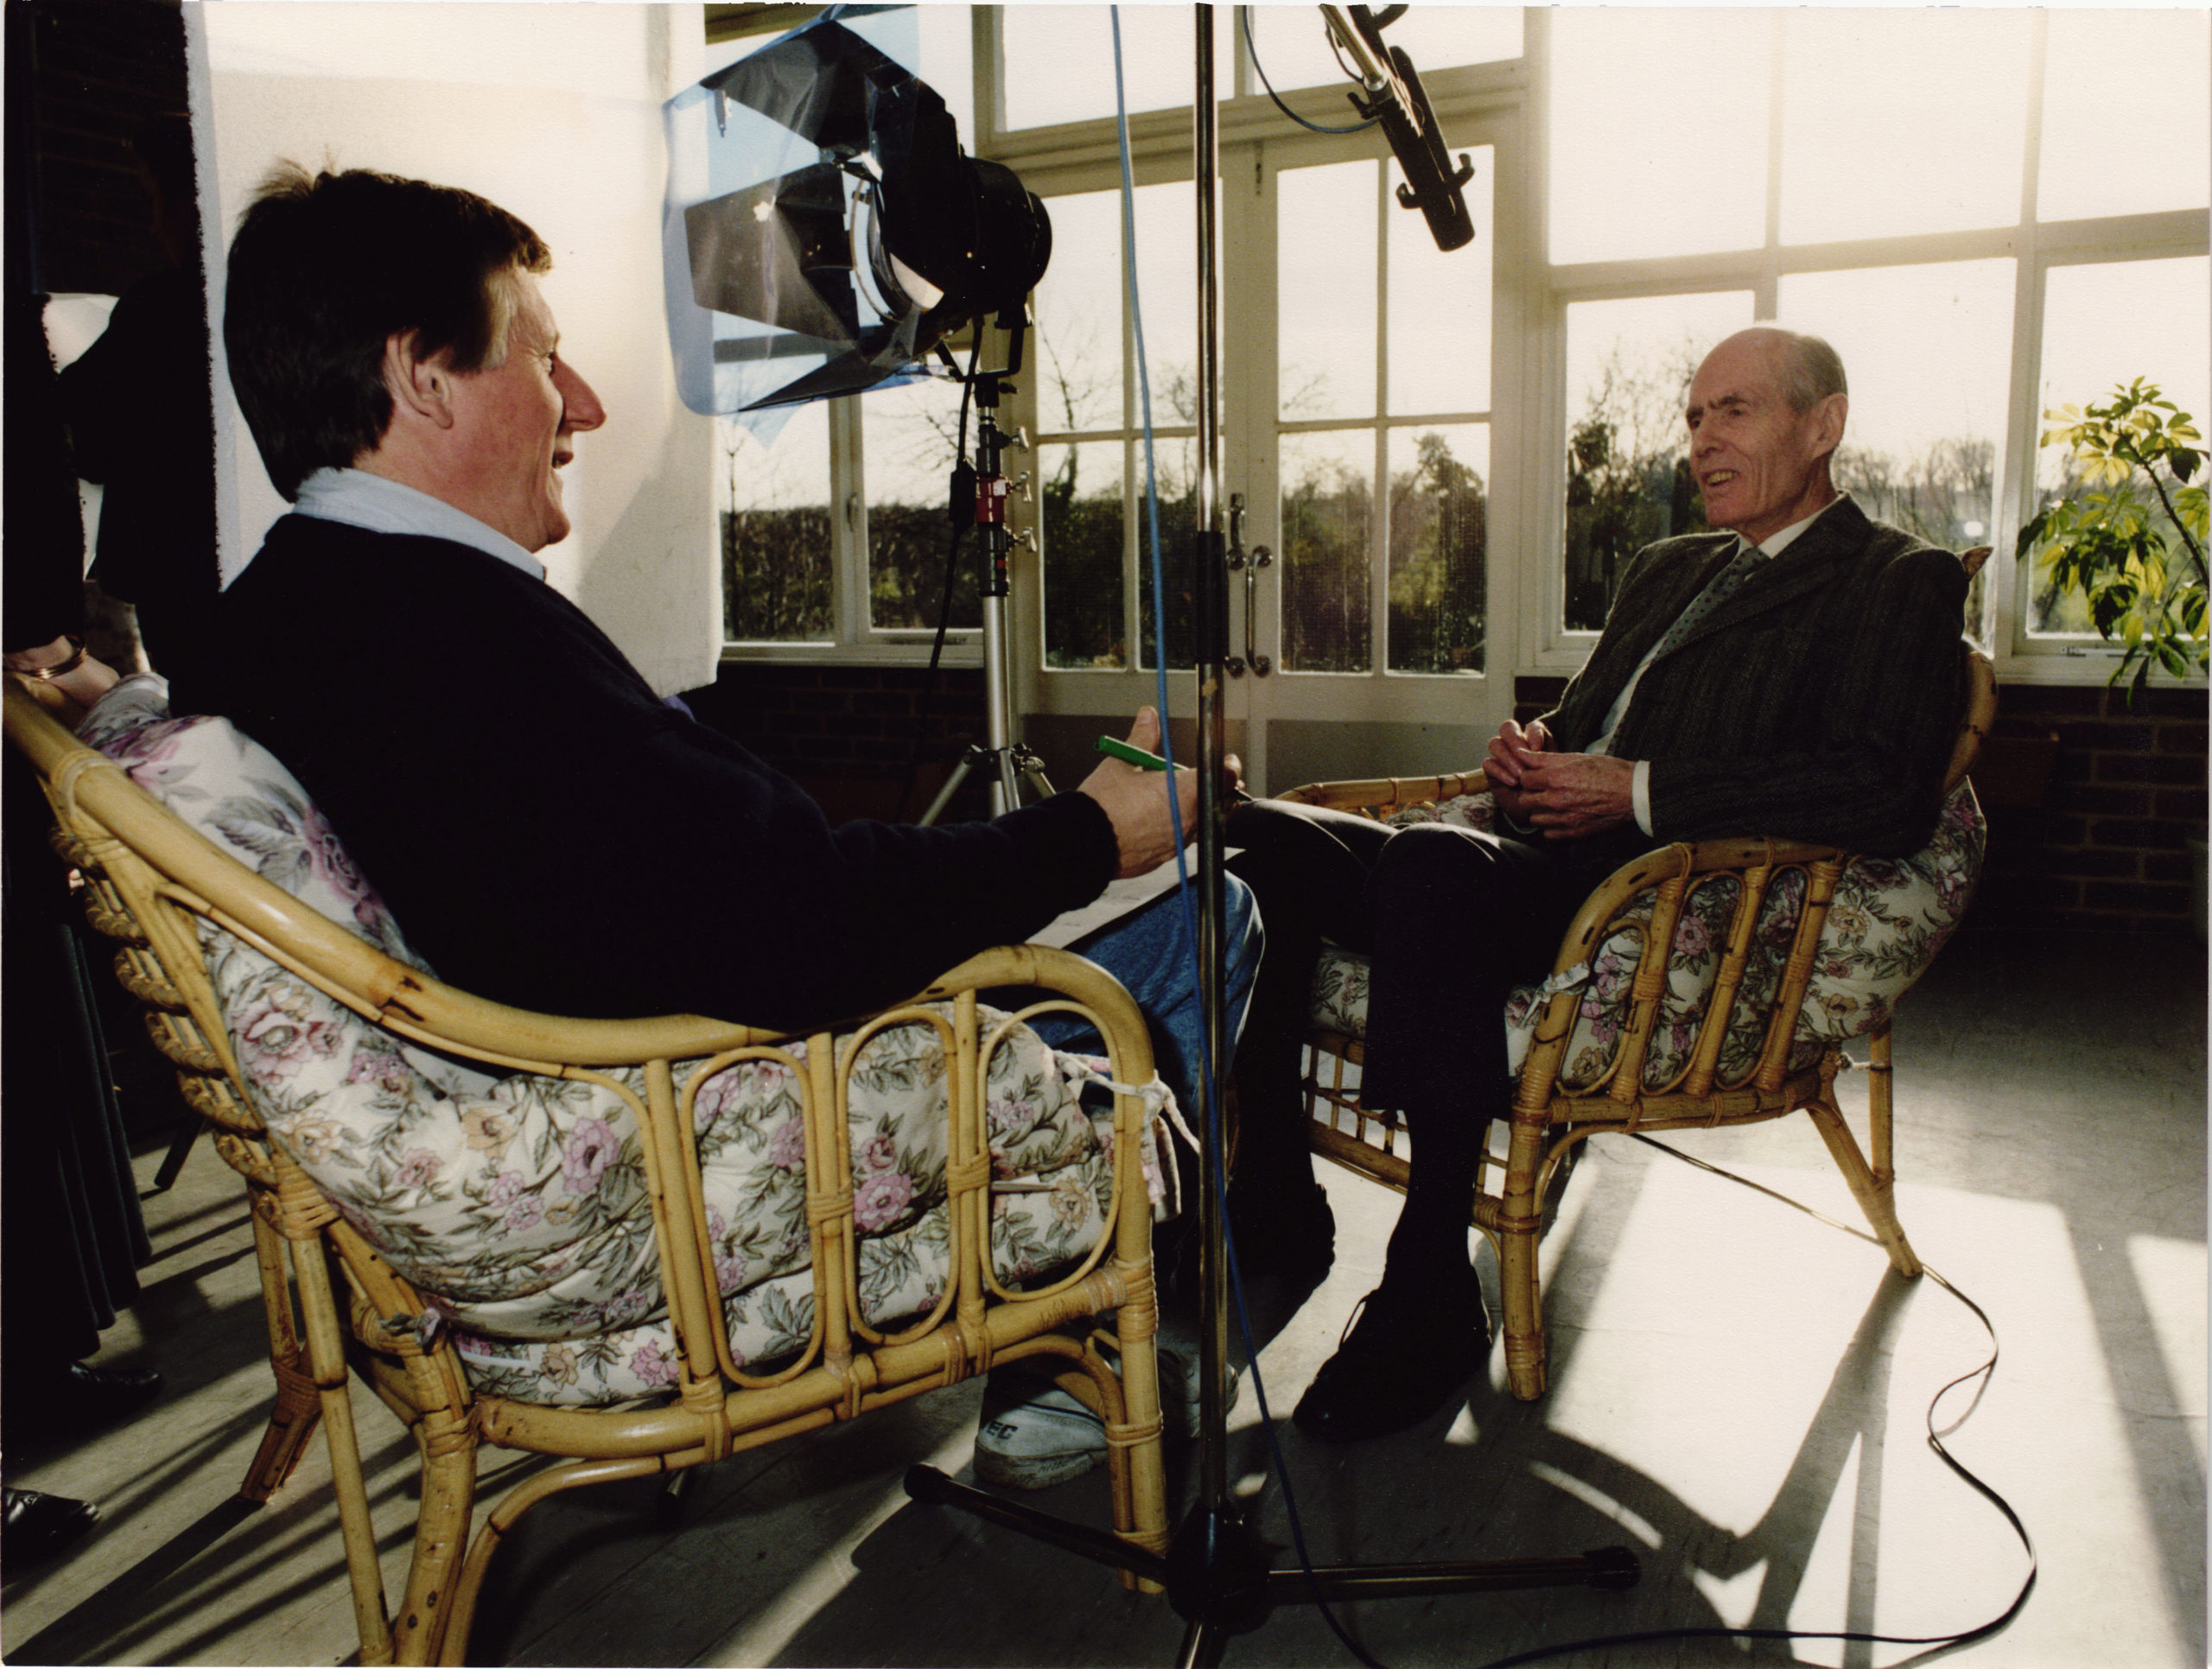 A man being interviewed, sat in a conservatory surrounded by microphones and lights